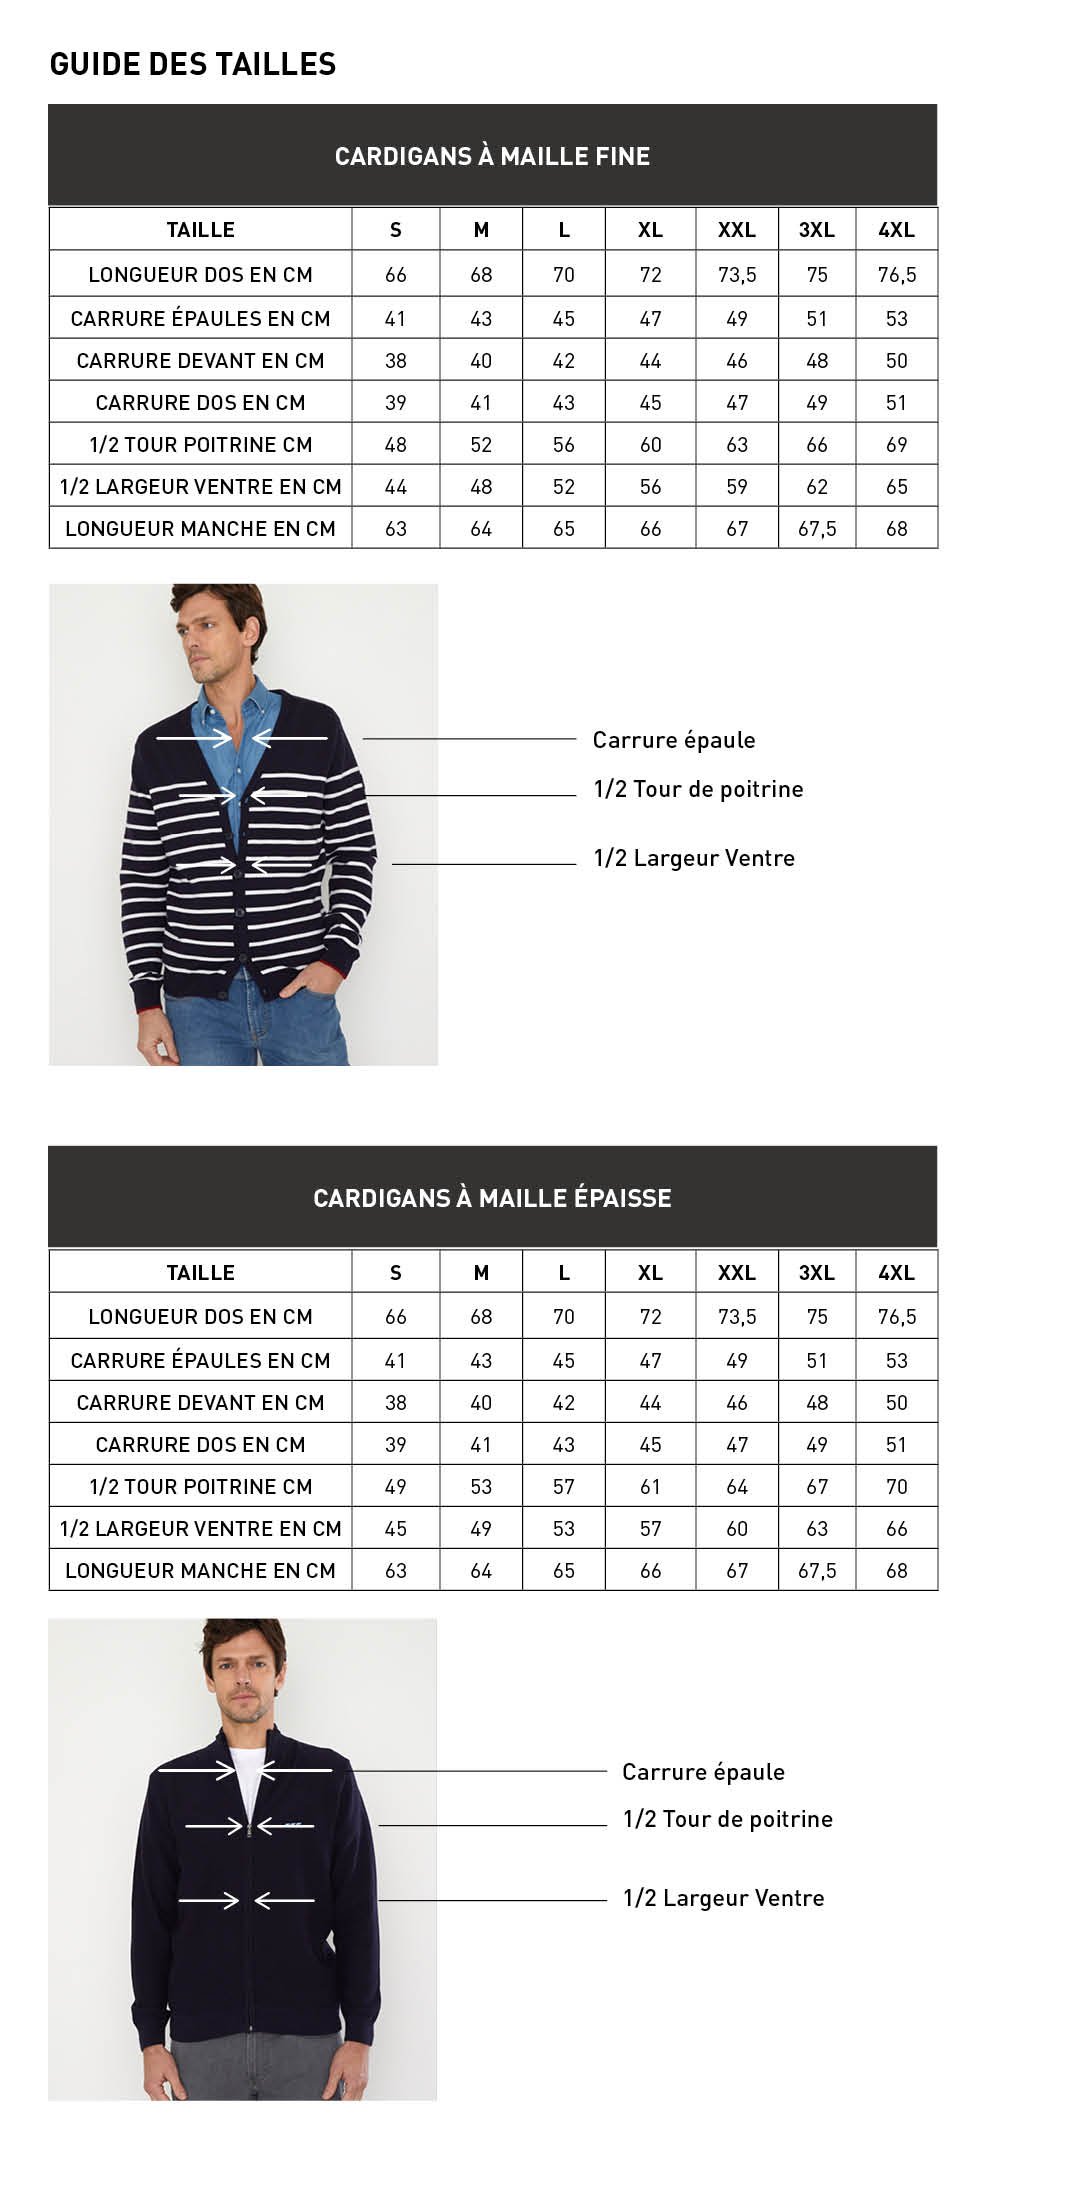 Guide des tailles cardigan homme